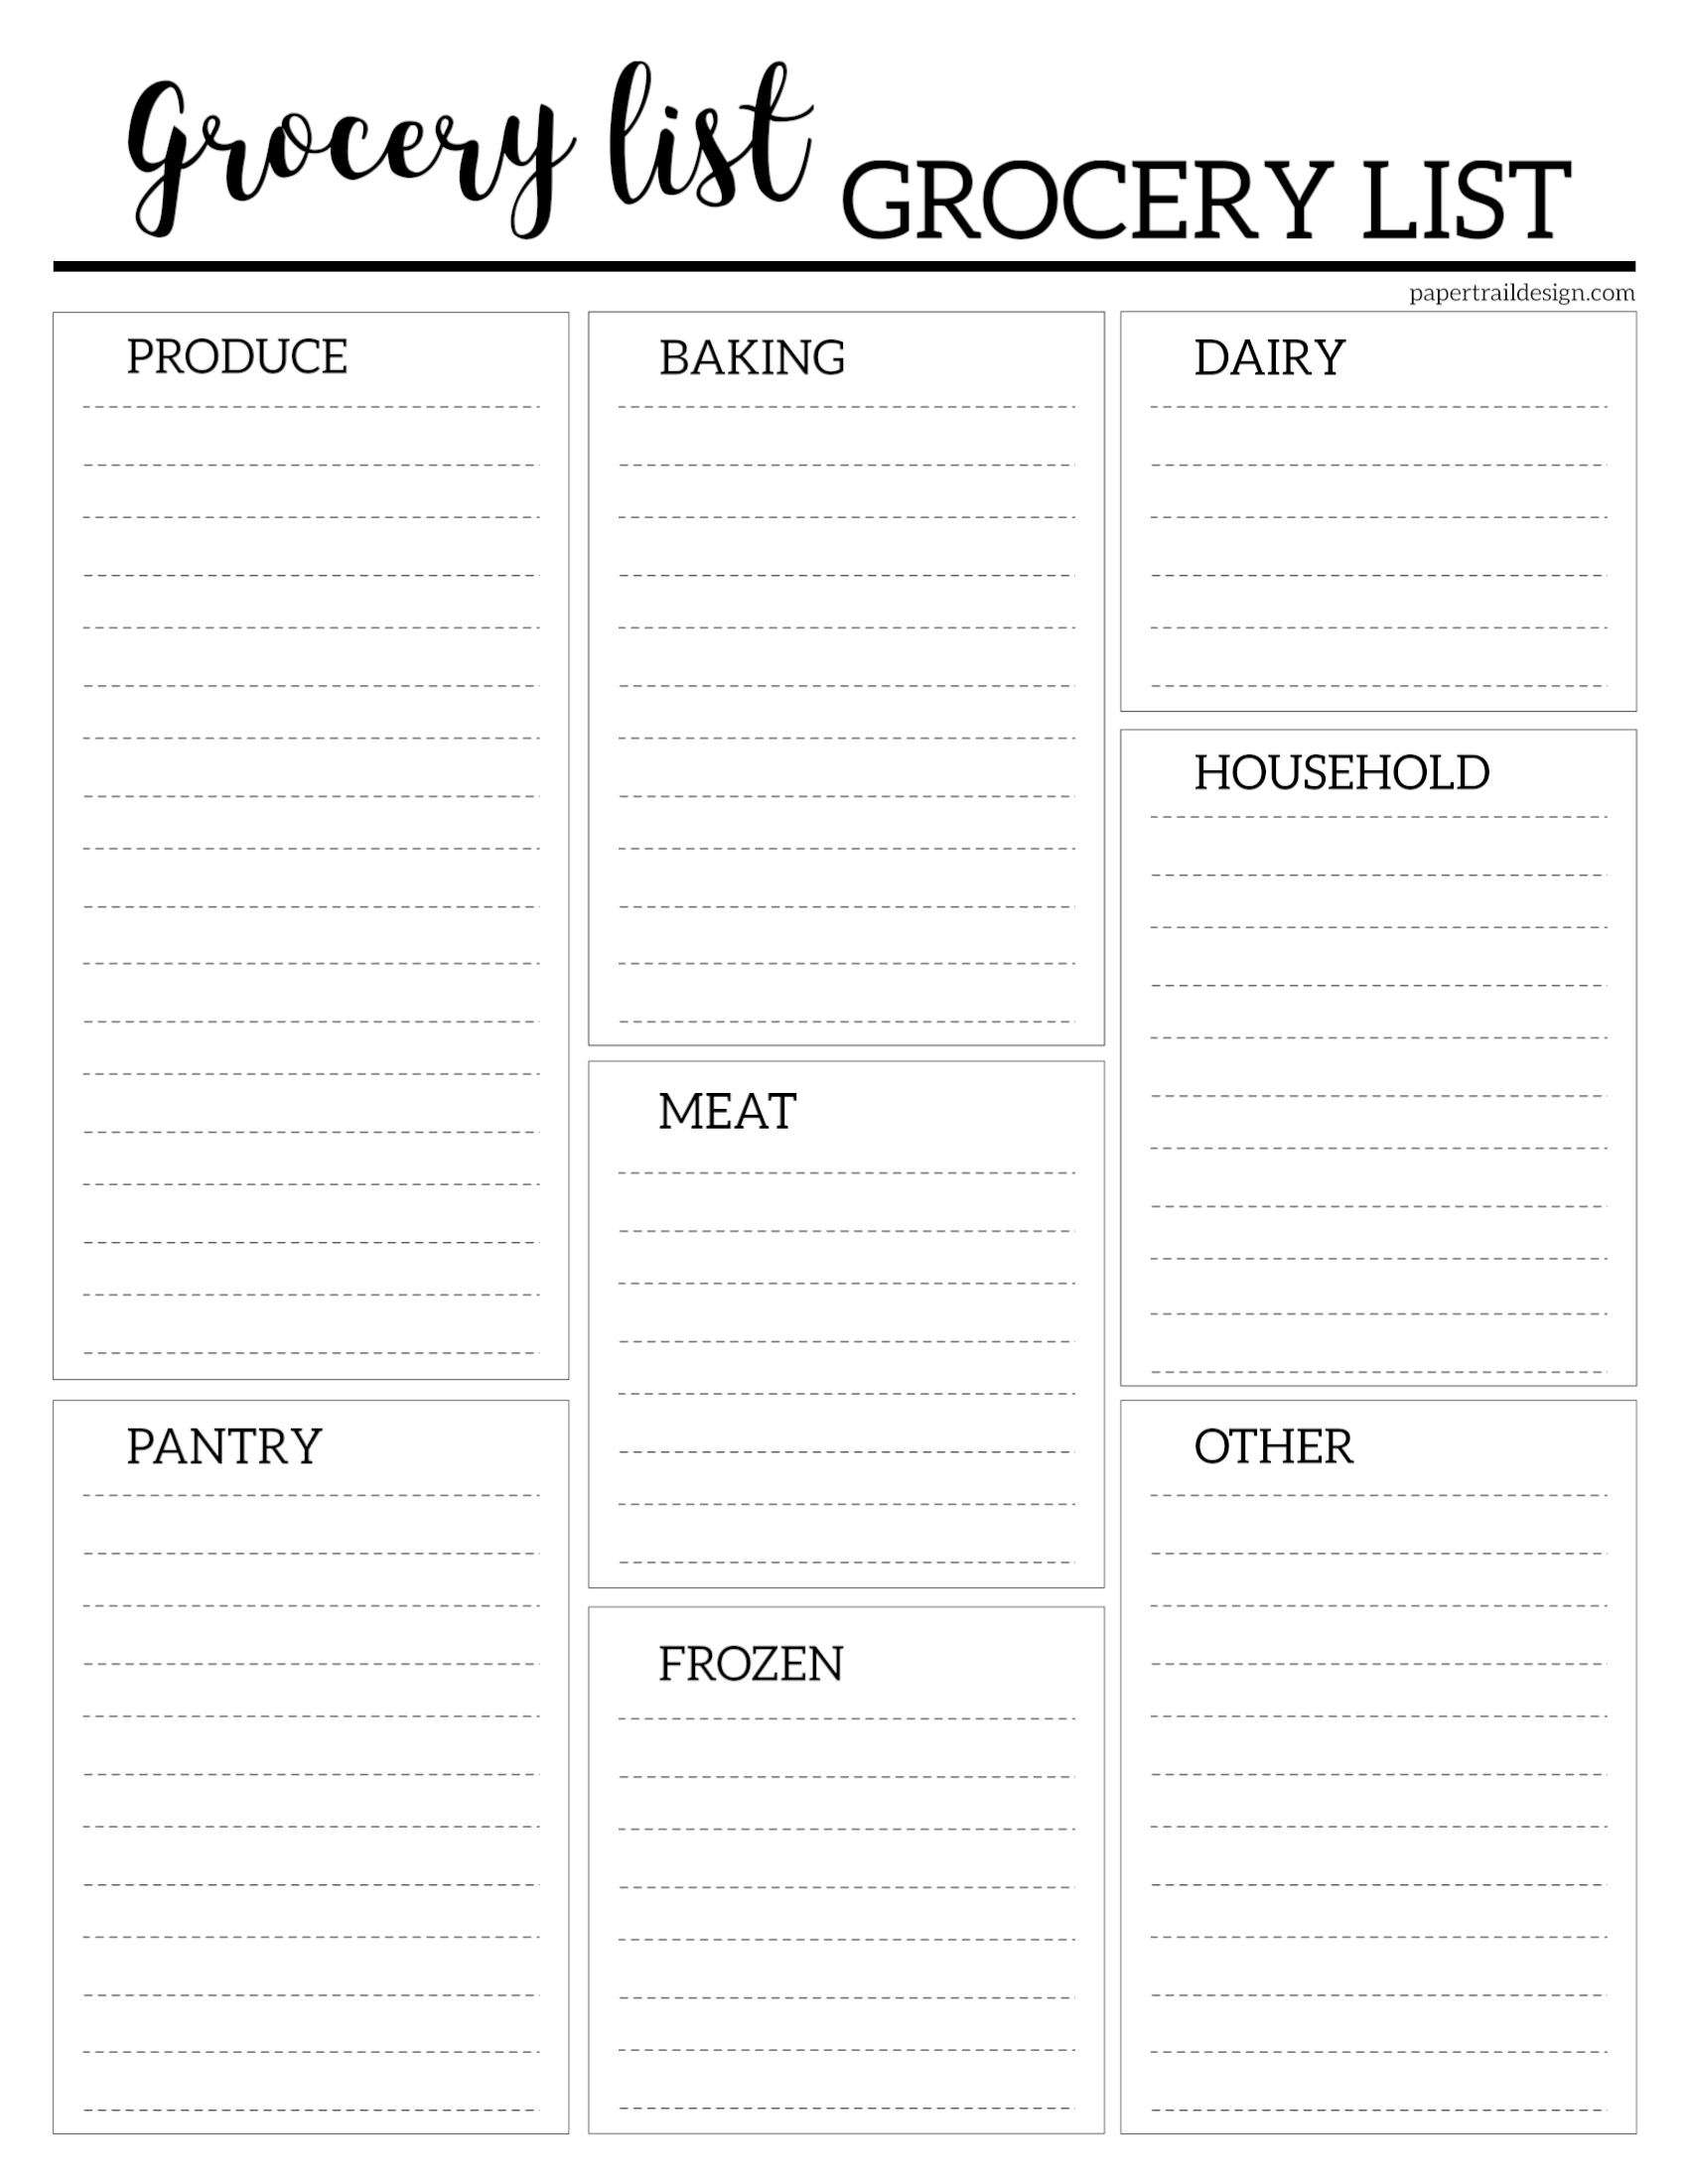 24-printable-grocery-list-templates-shopping-lists